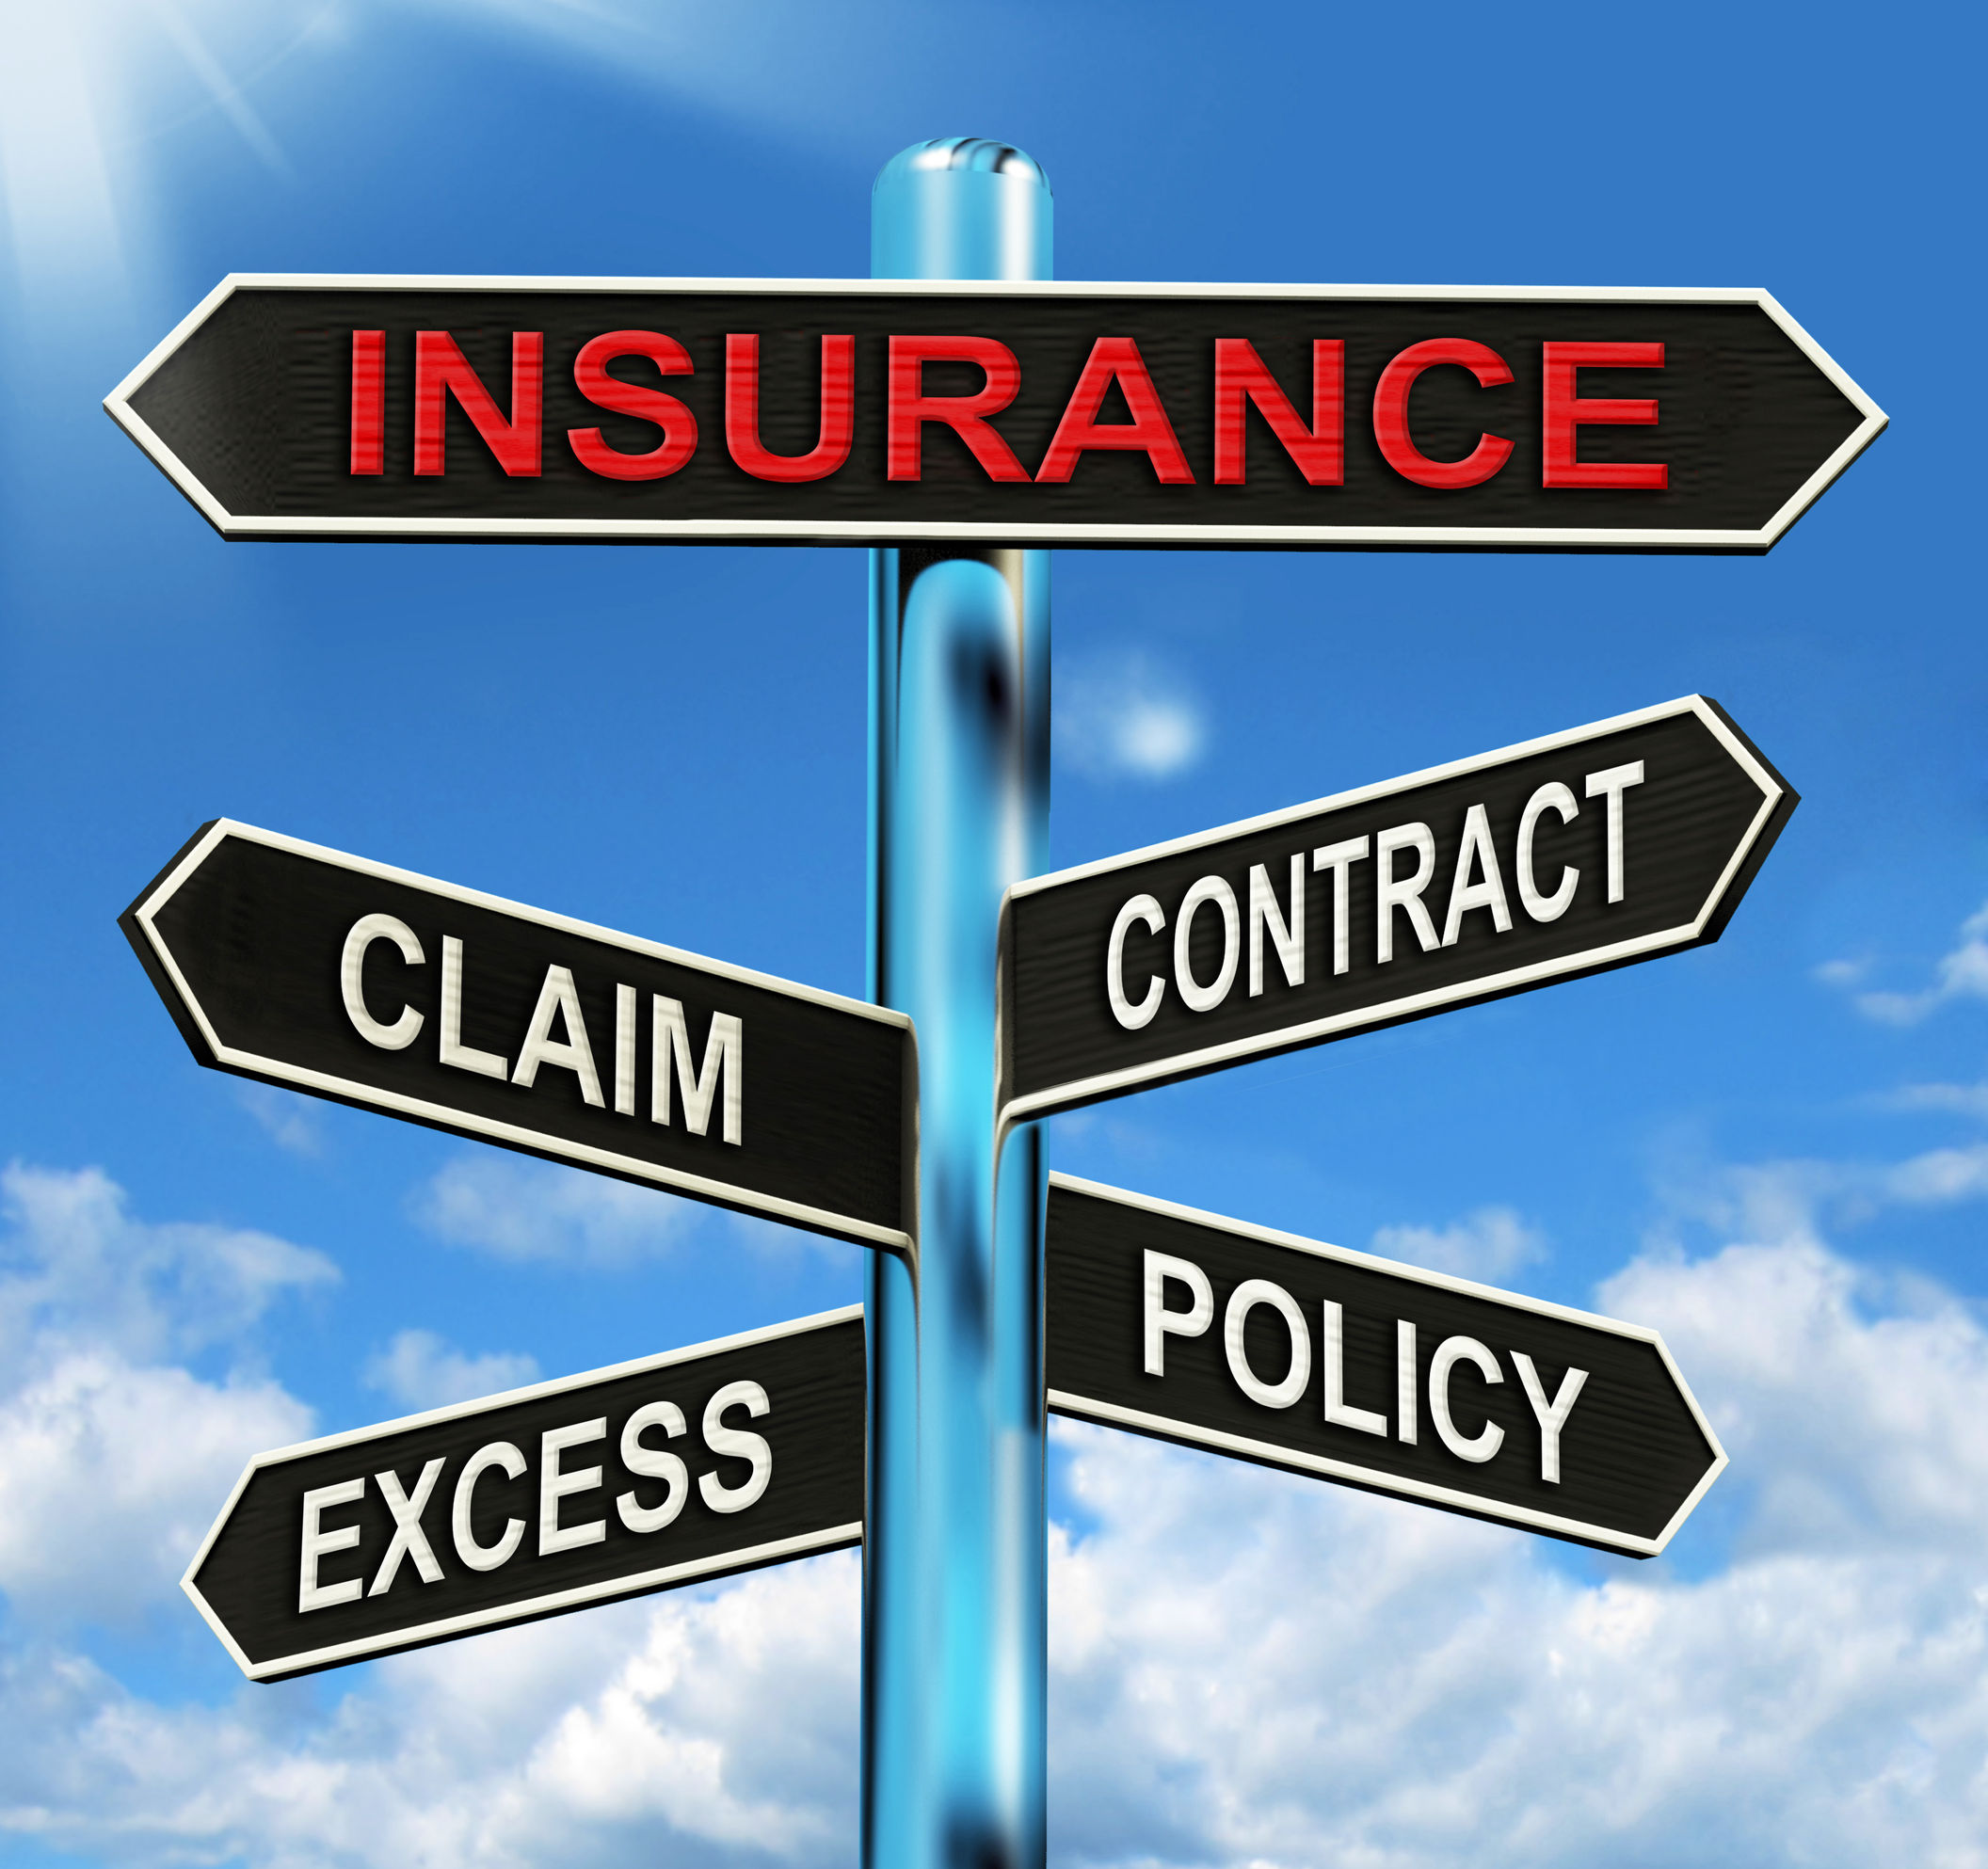 Signpost with insurance claim excess policy